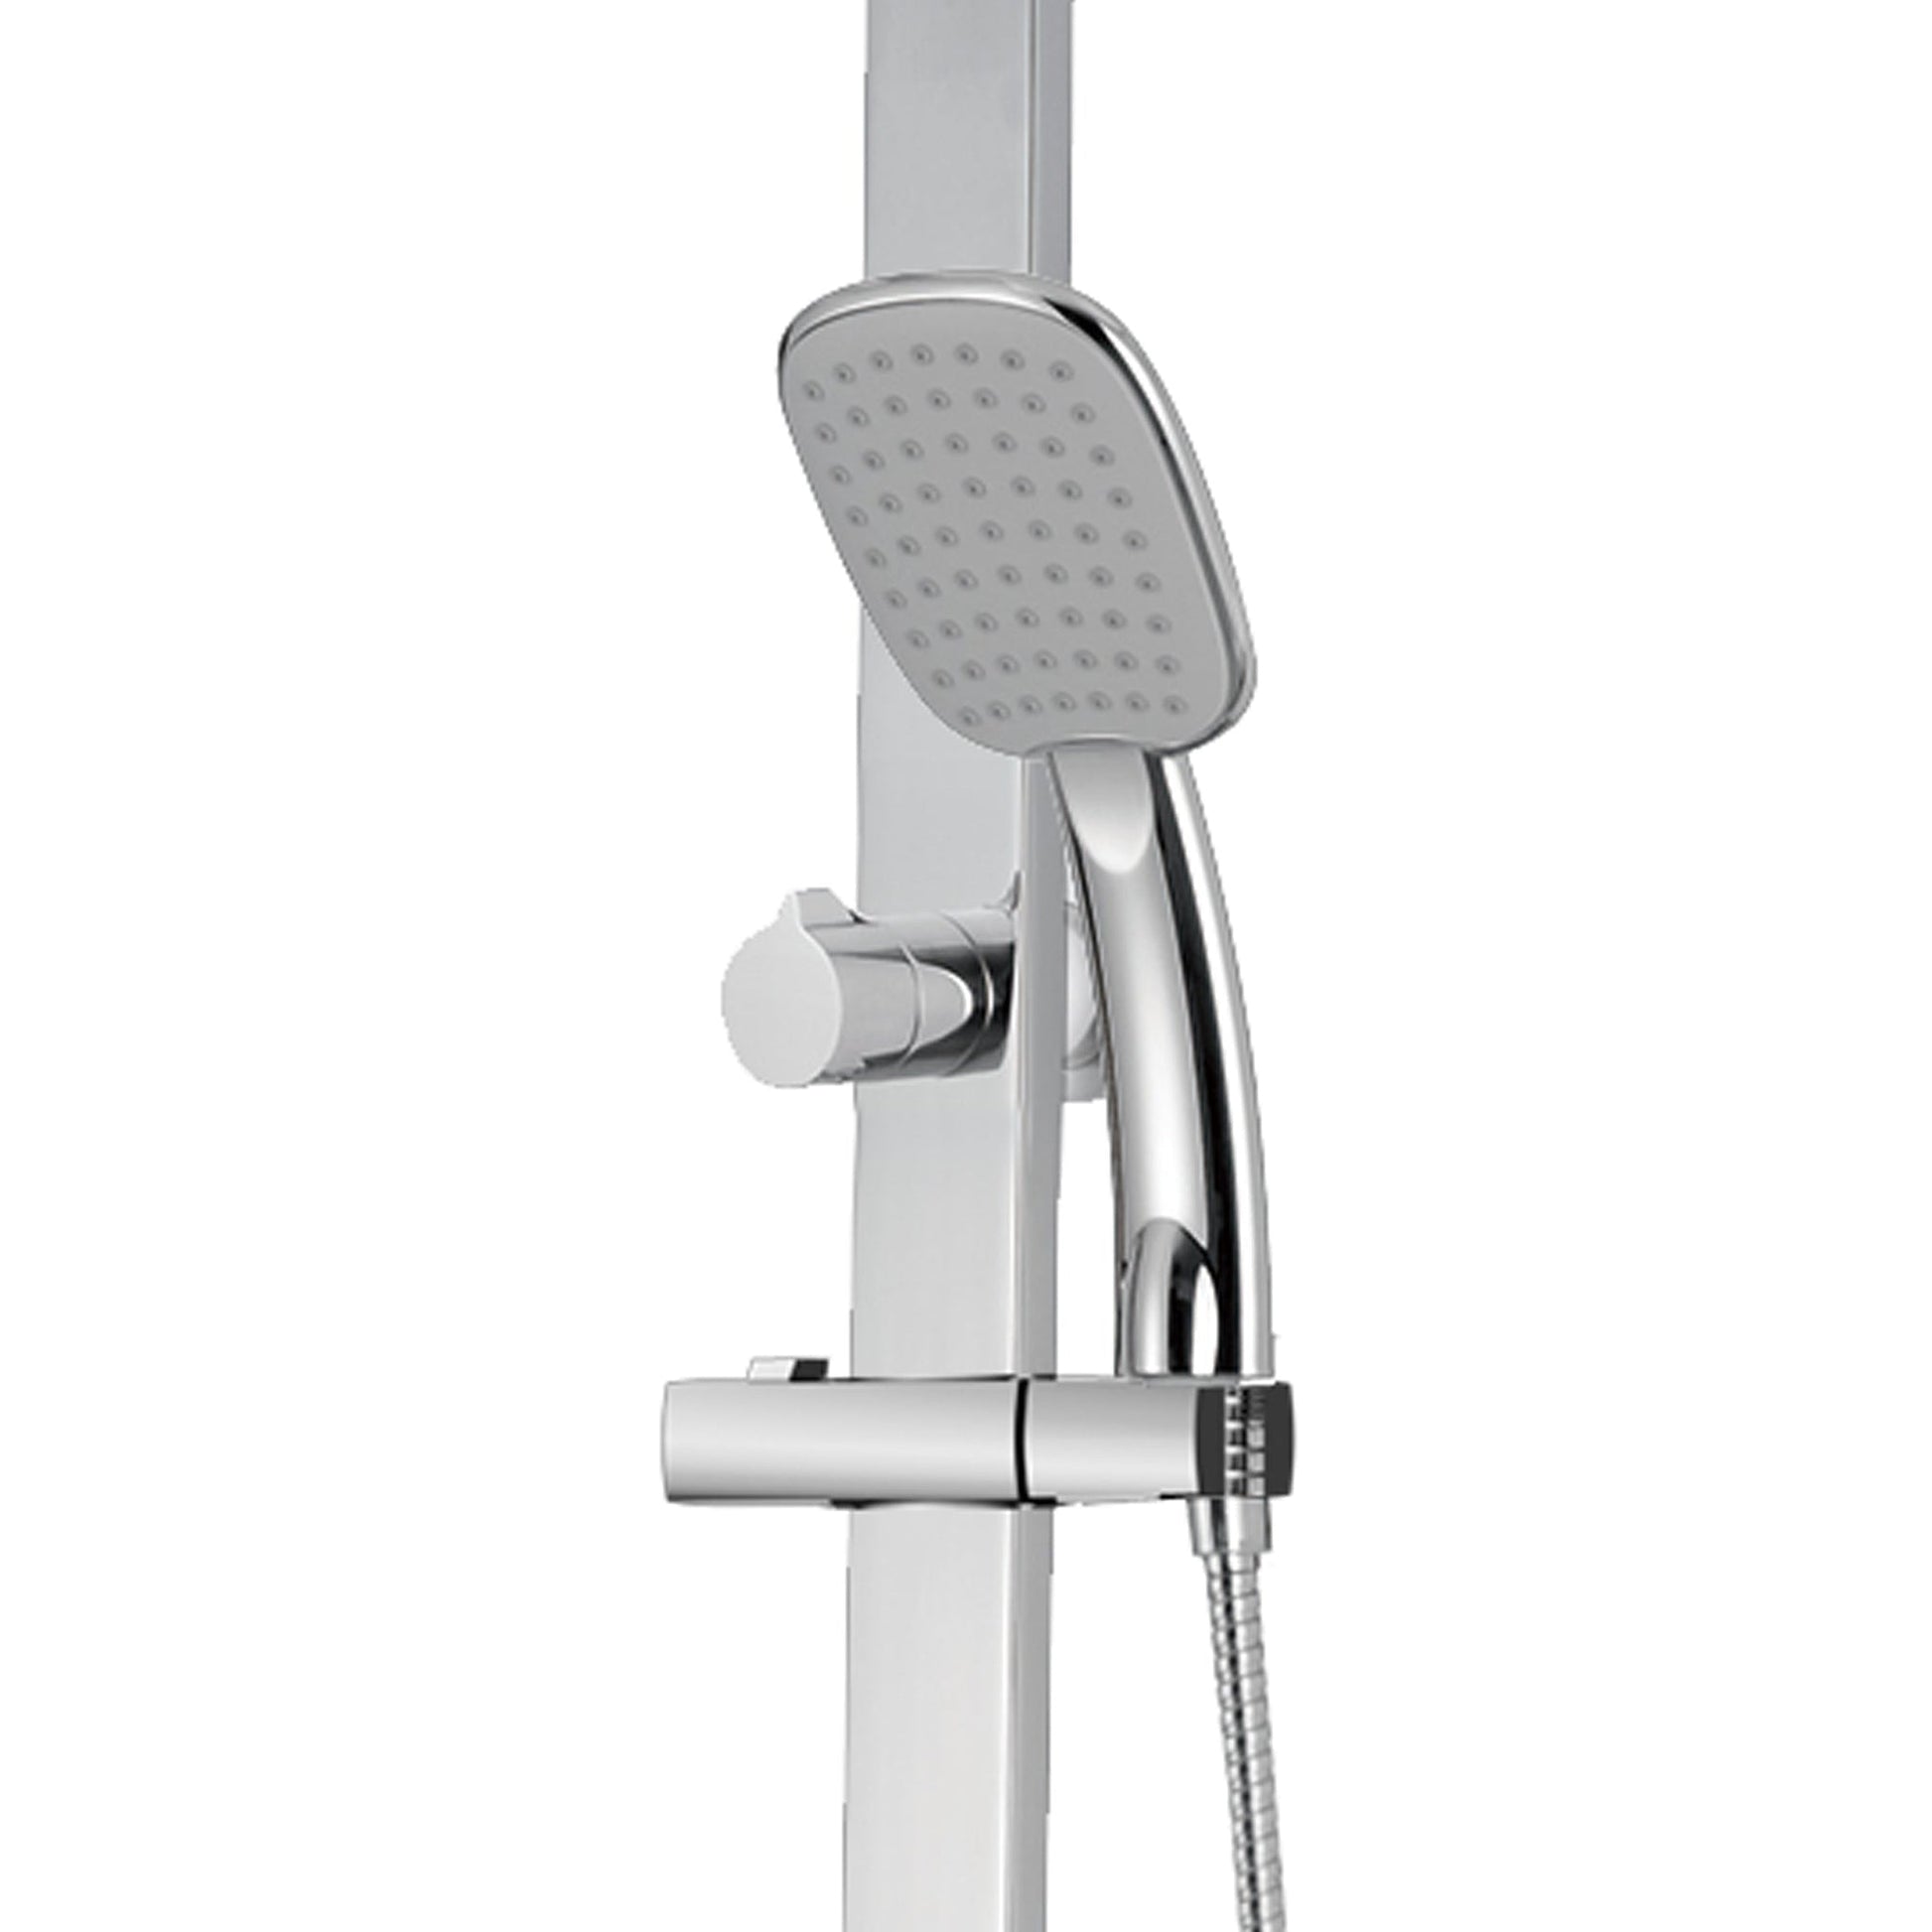 PULSE ShowerSpas Monte Carlo Rain Shower System 2.5 GPM in Chrome Finish With Multi Function Hand Shower